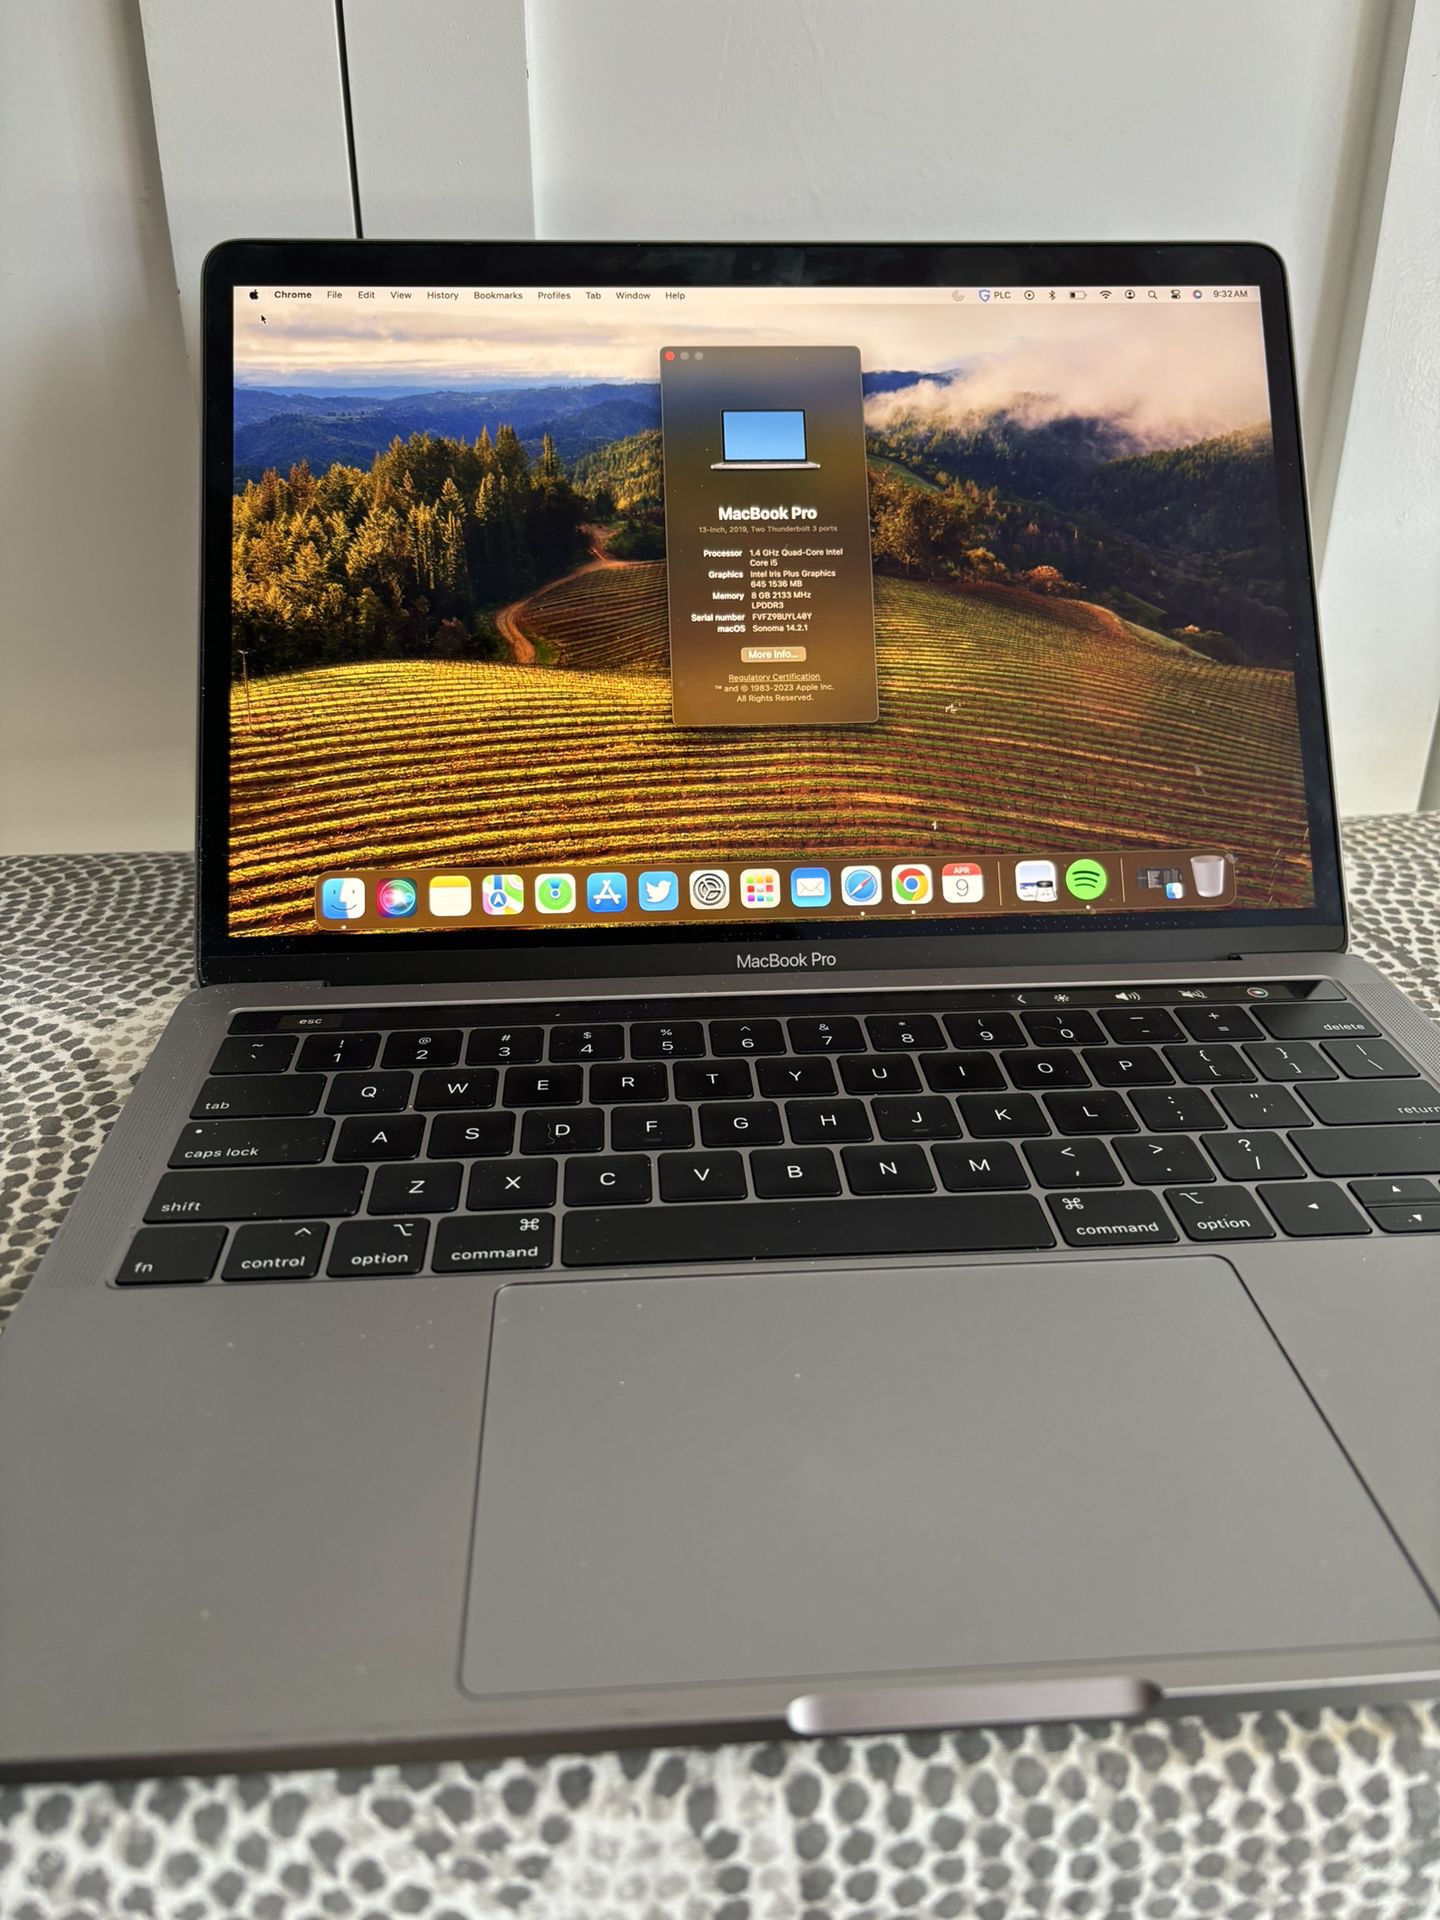 2019 Apple MacBook Pro with 1.4GHz Intel Core i5 (13 inch, 8GB RAM, 128GB SSD) - Space Gray 